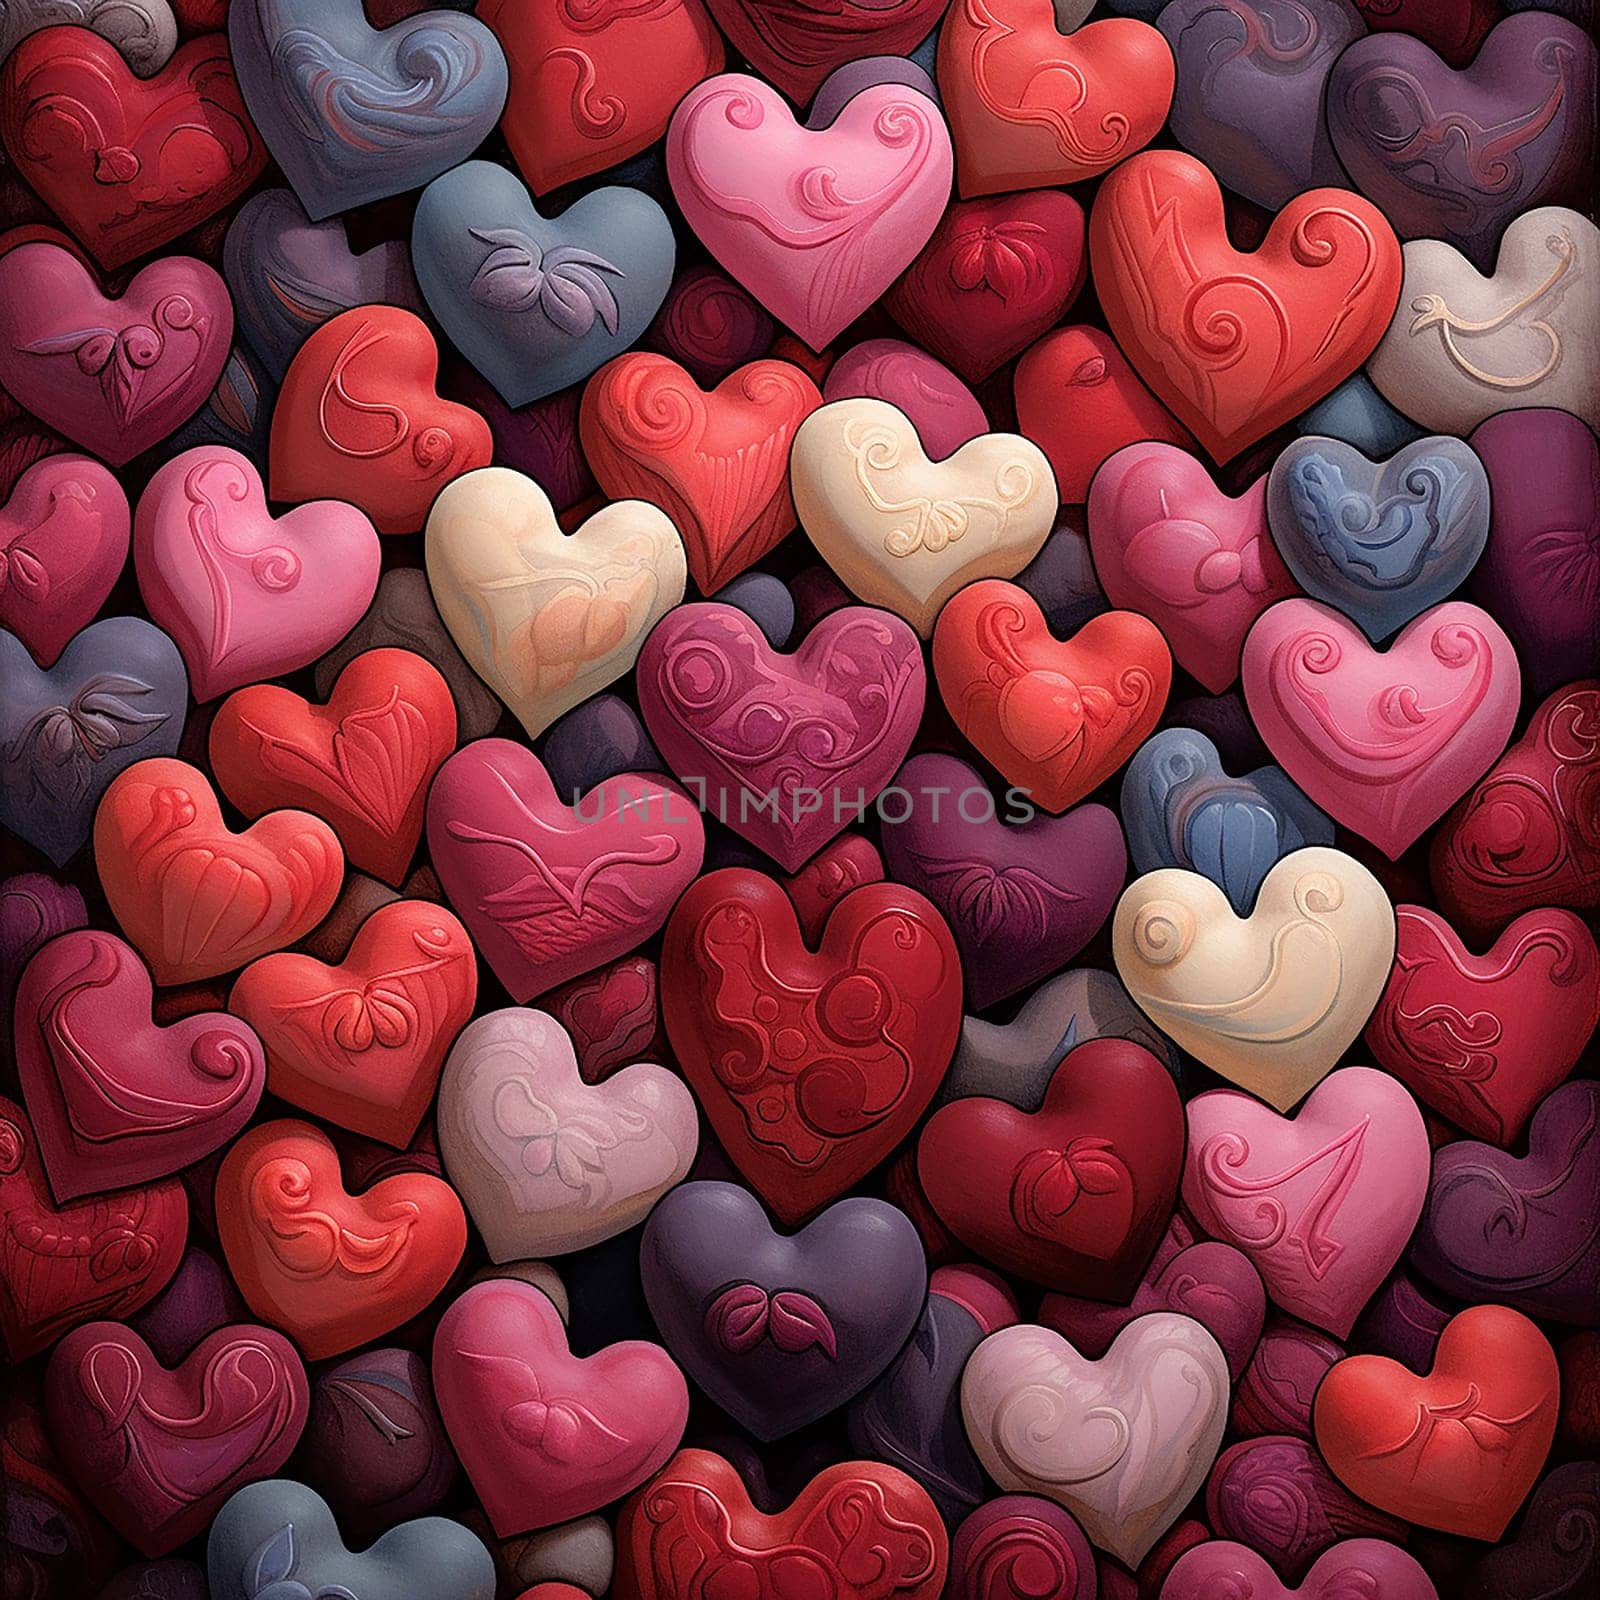 Multicolored heart shapes with various patterns in a tight arrangement.